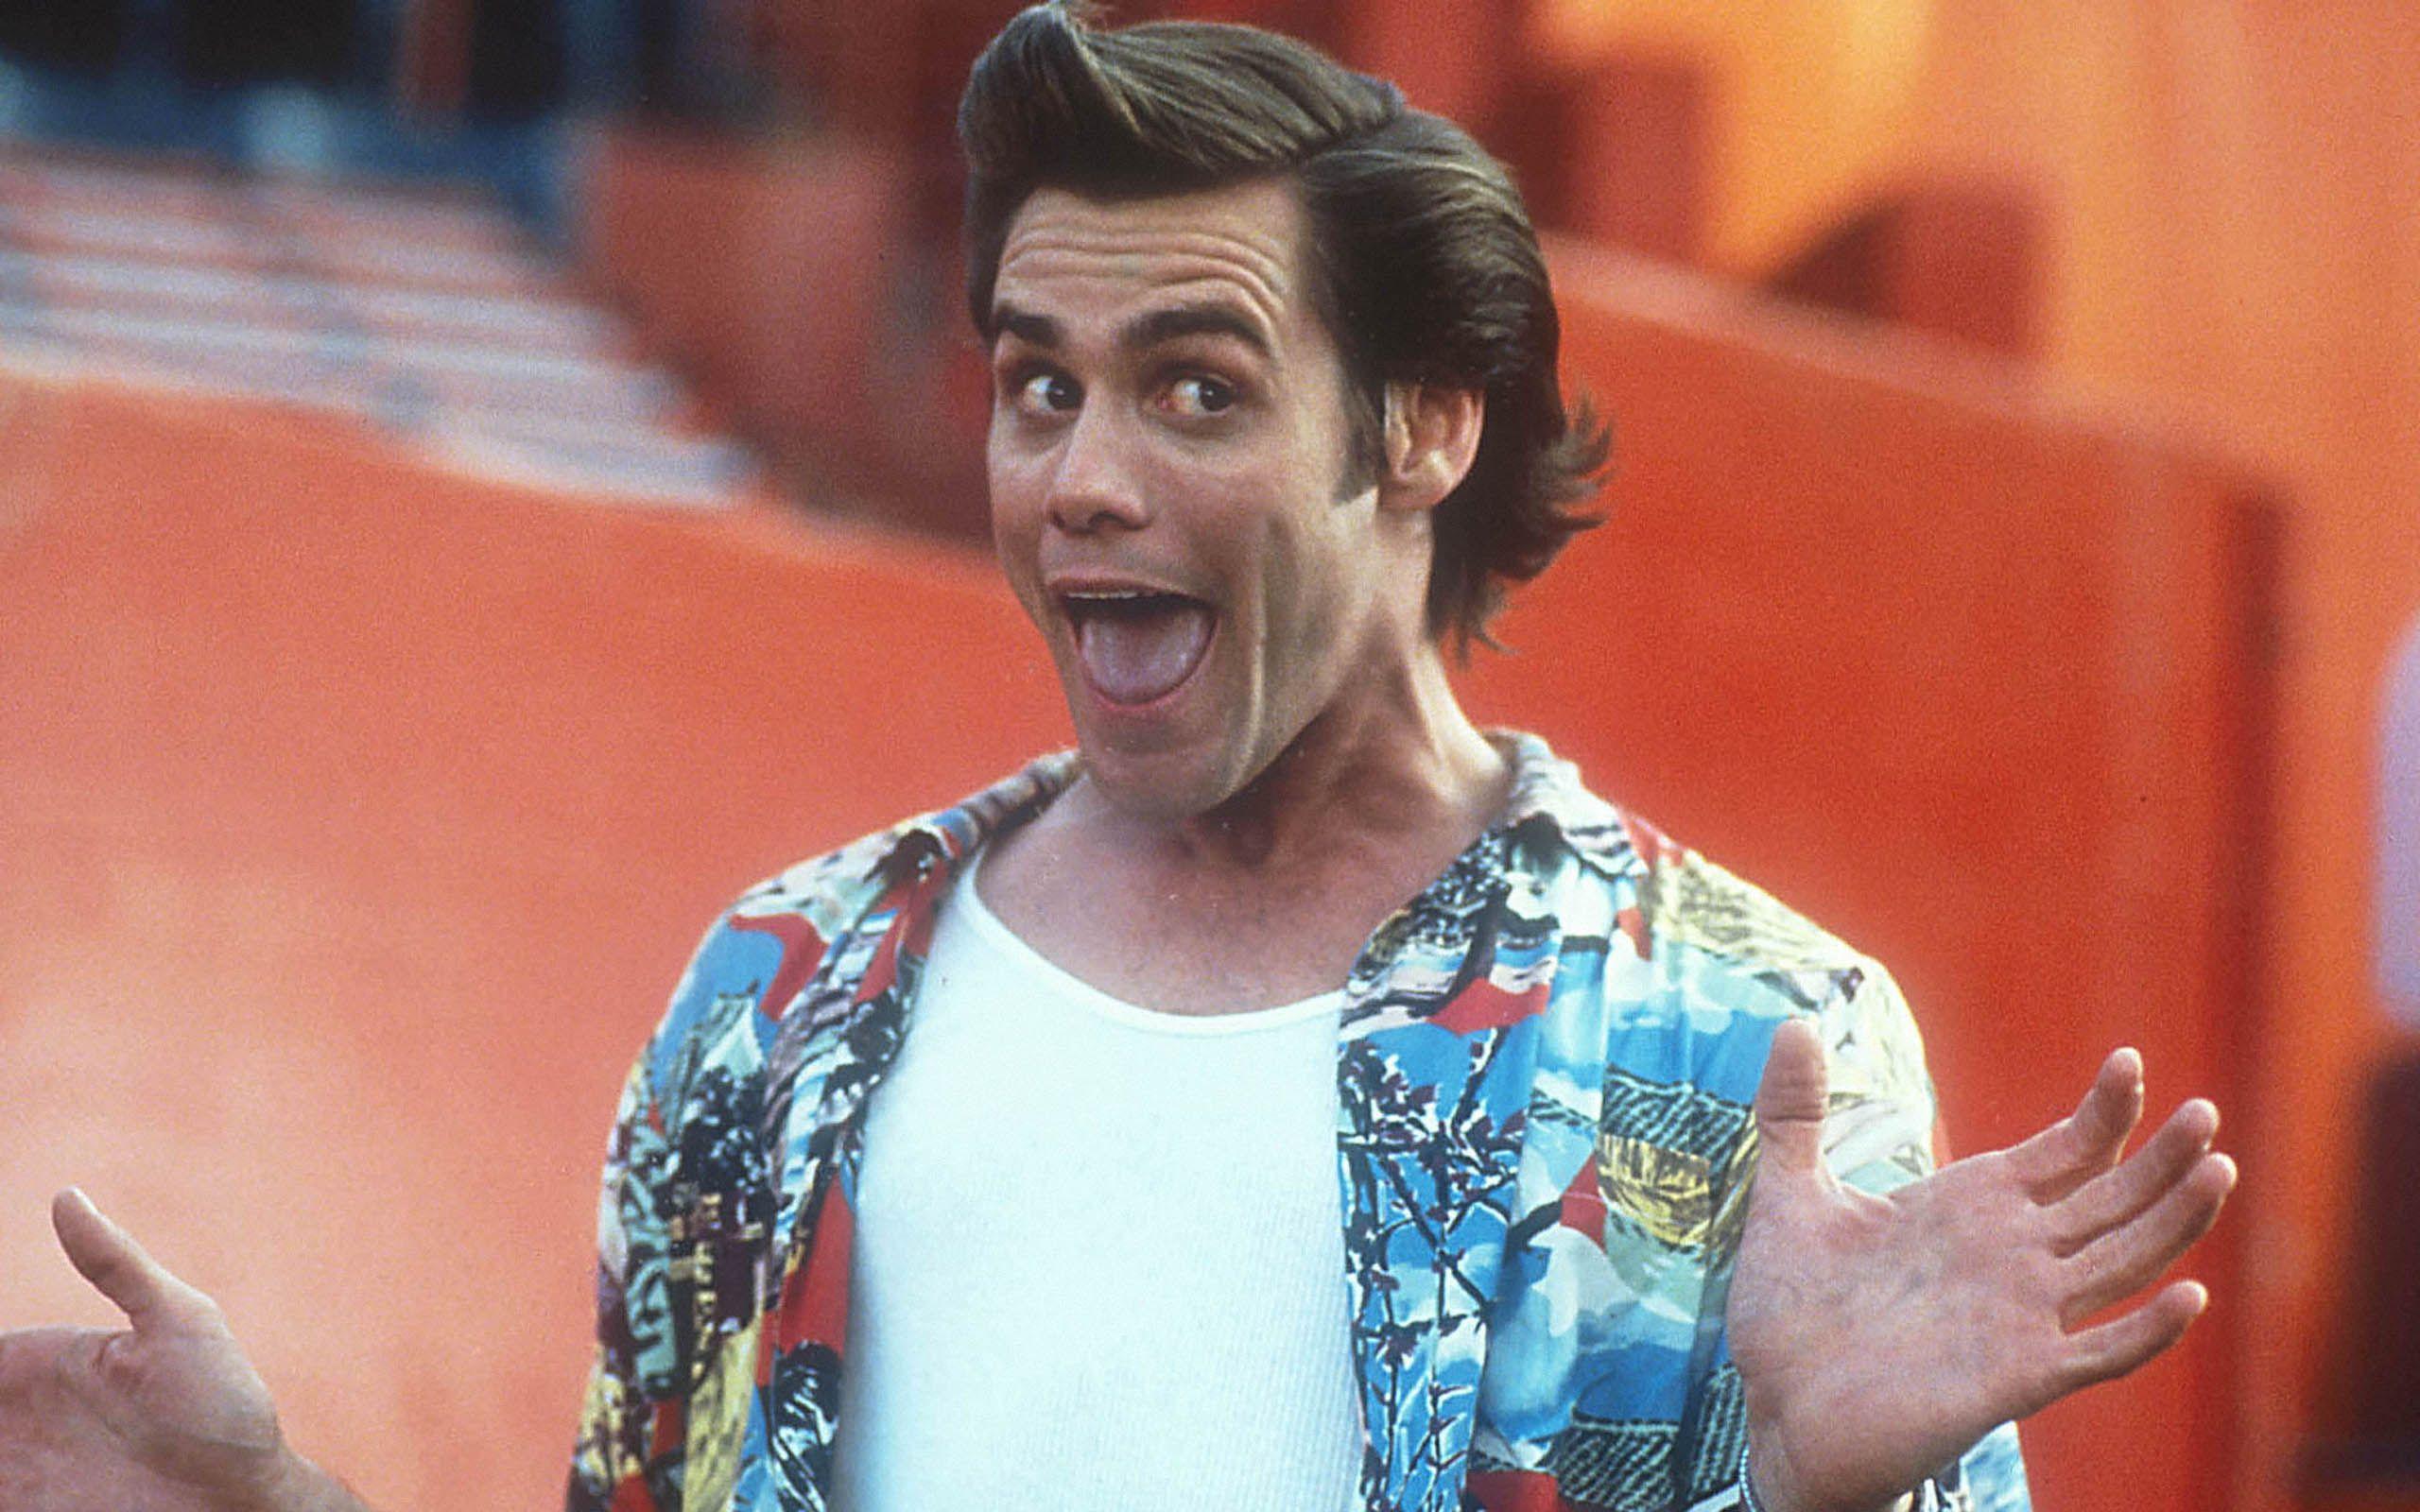 Jim Carrey Prepares For Psychedelic Film Role By Tripping Balls On